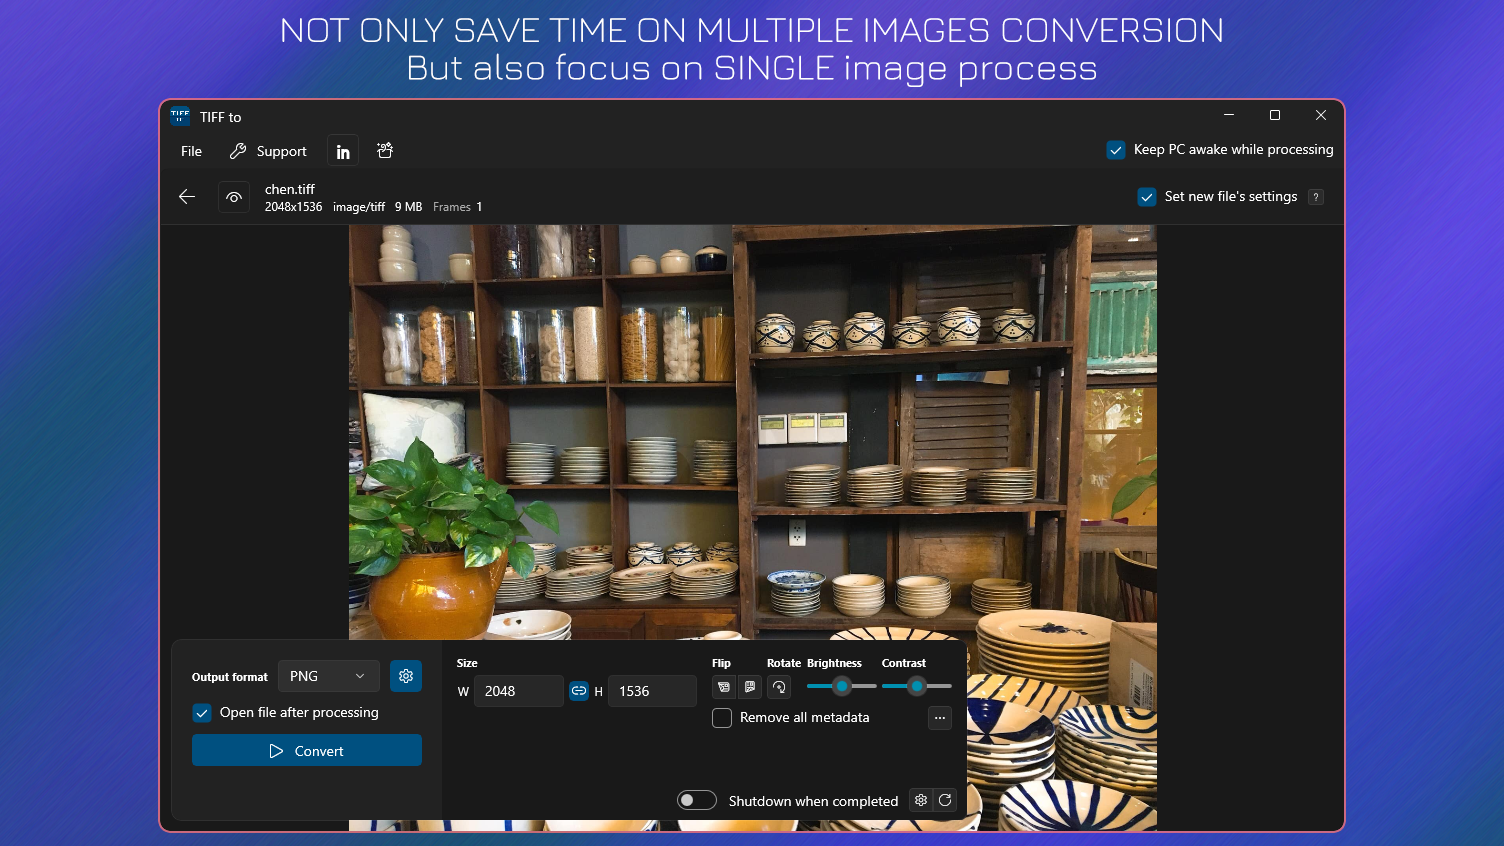 Not Only Save Time in Multiple Images Conversion - But also focus on single image process.